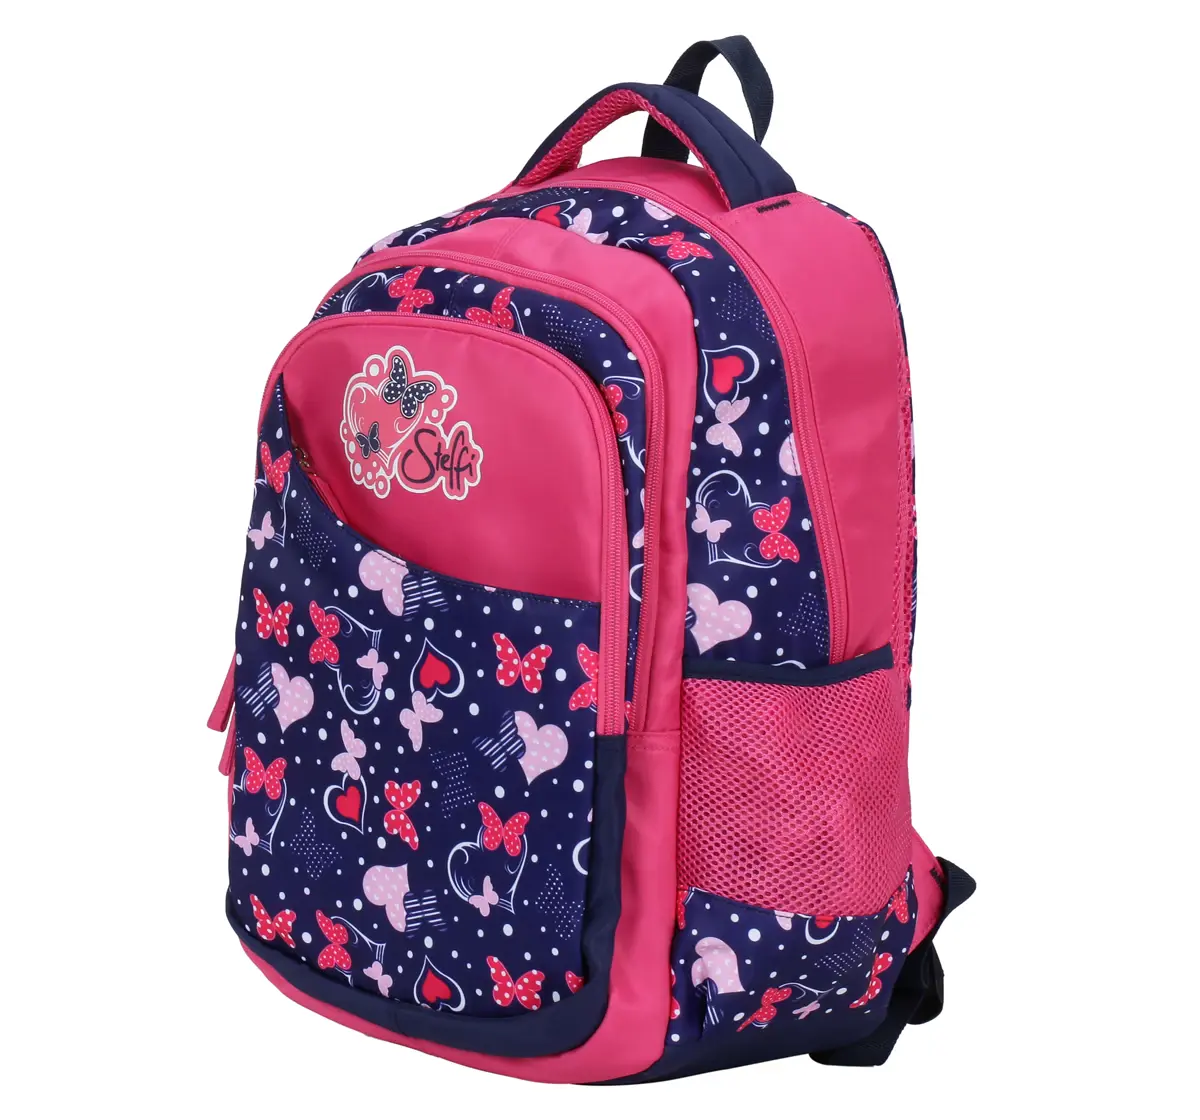 Simba Steffi Love Rising Sparkle Pink 15 Backpack Multicolor 3Y+